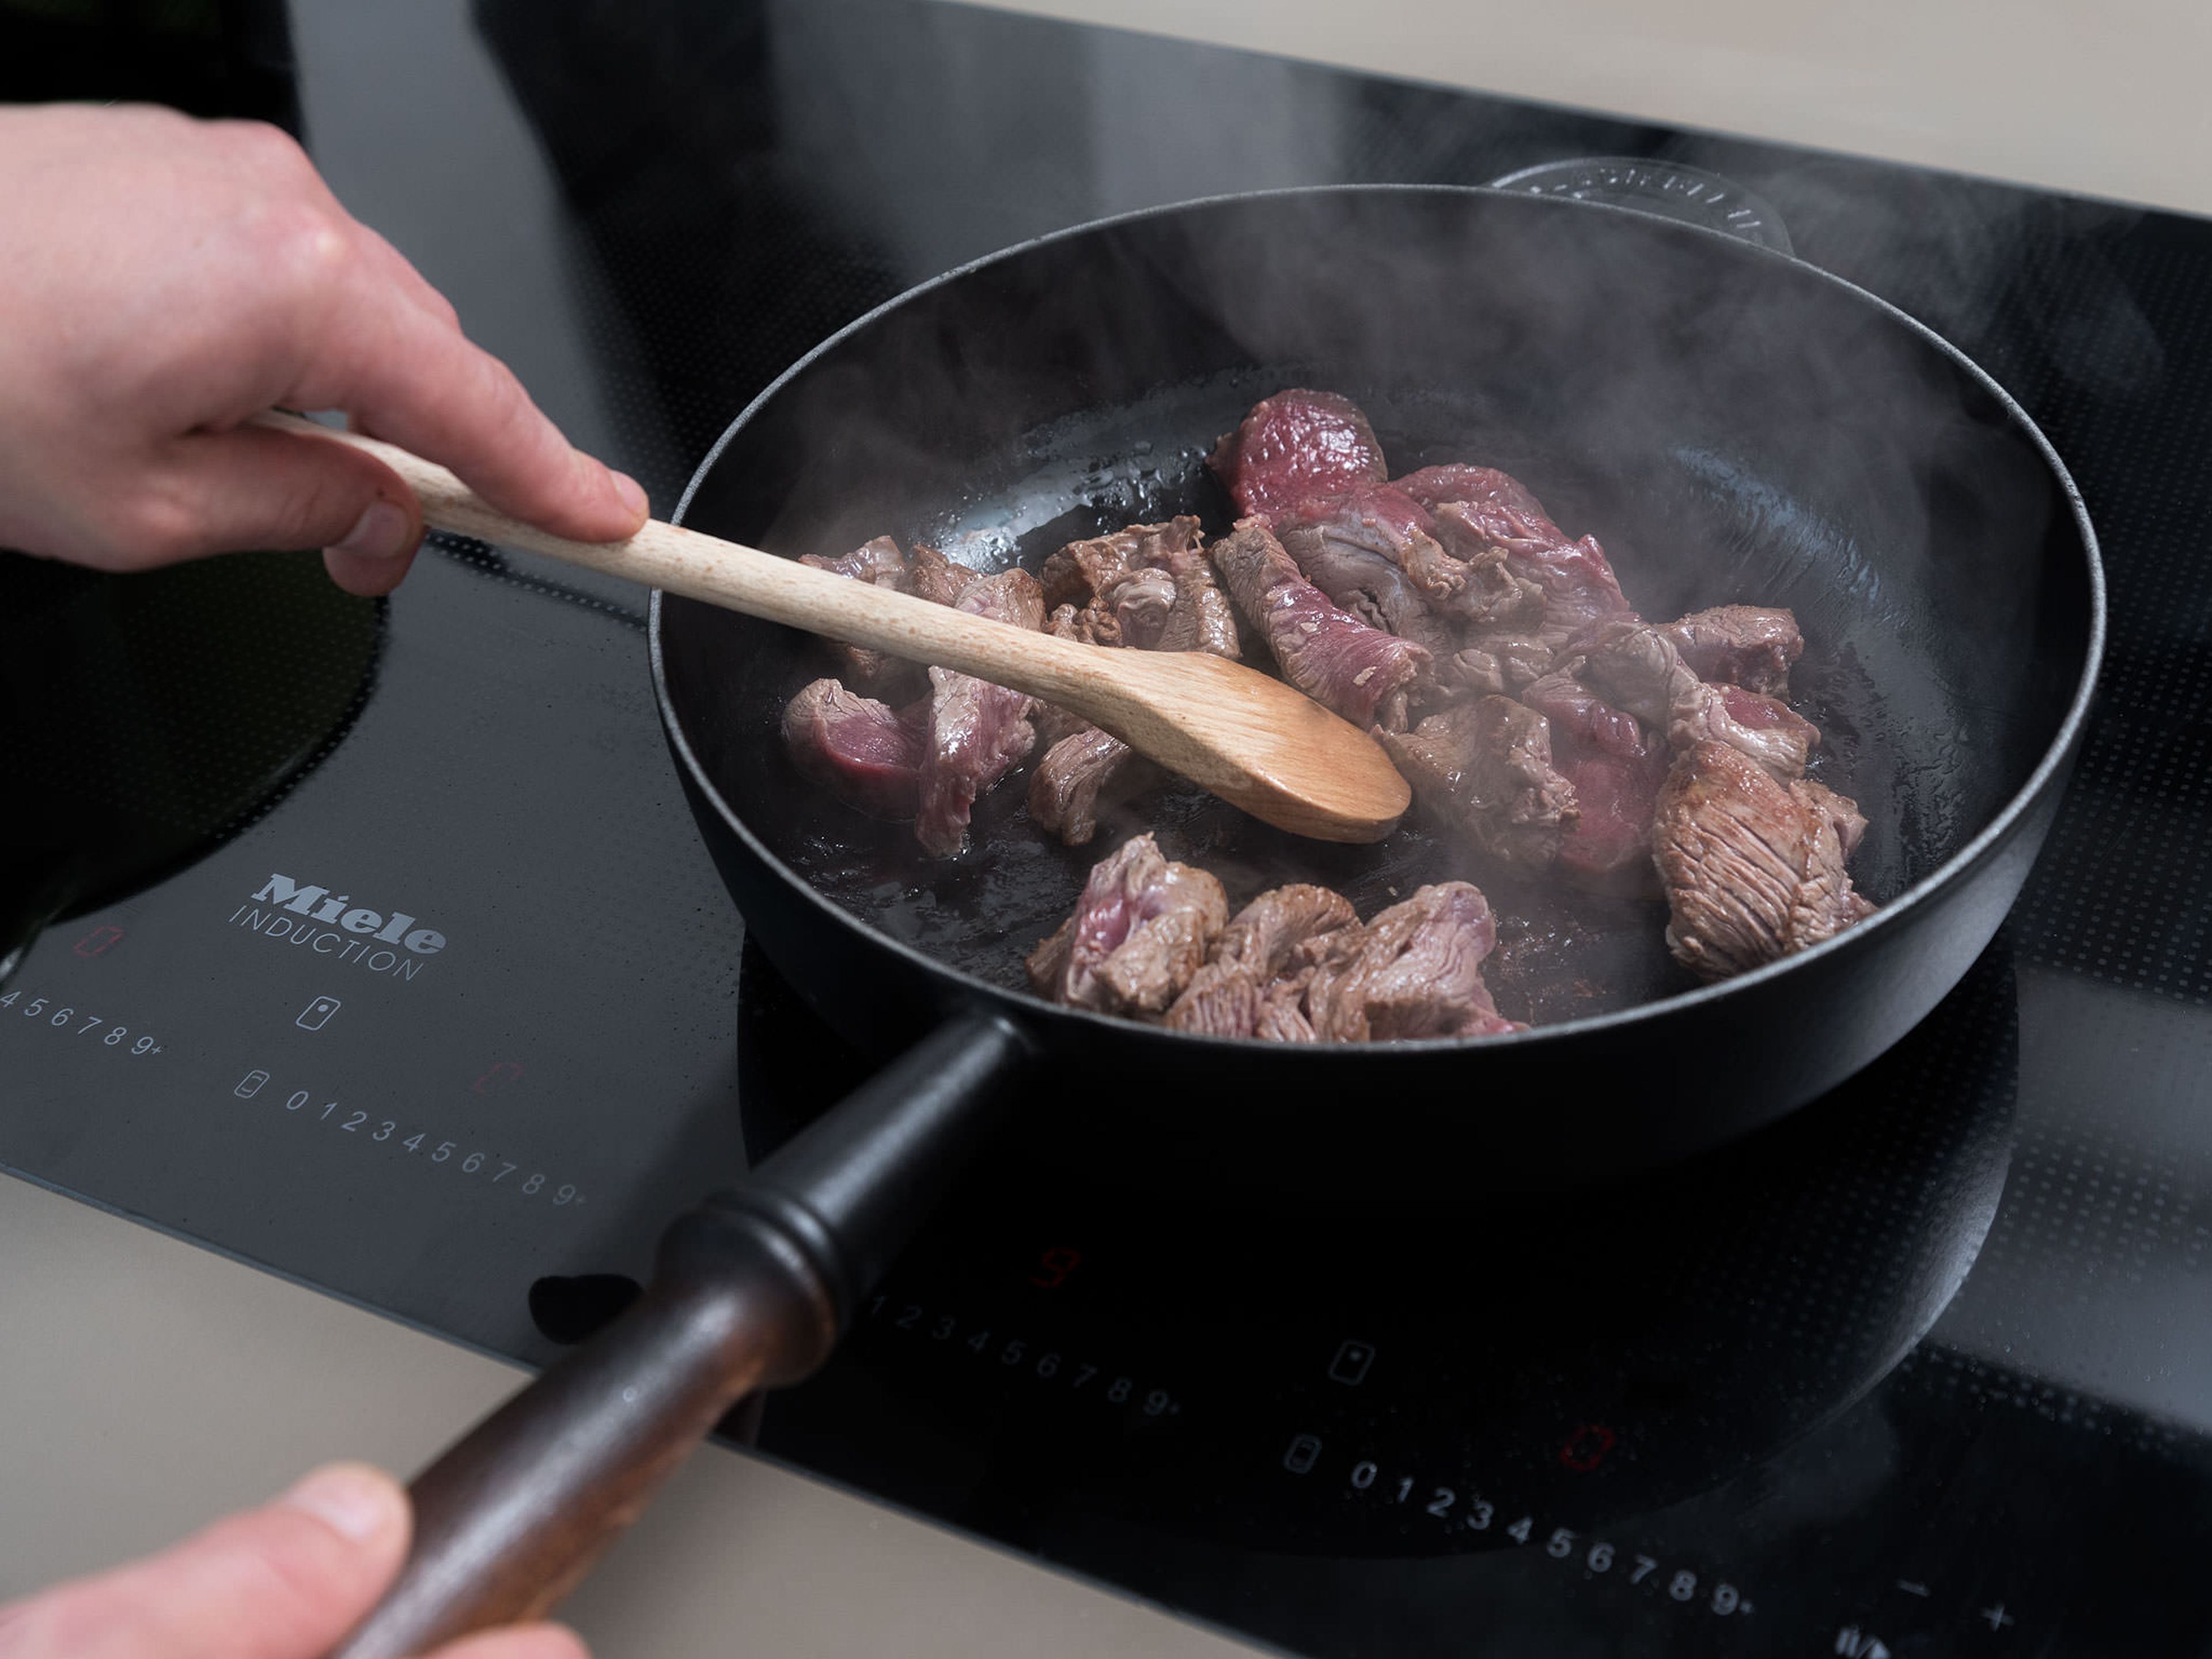 Heat half of olive oil and butter in a pan. Sear beef fillet strips for approx. 3 – 4 min., or until browned but still tender. Remove beef from the pan and keep warm. Cook tagliatelle approx. 6 min. or until al dente, then drain.